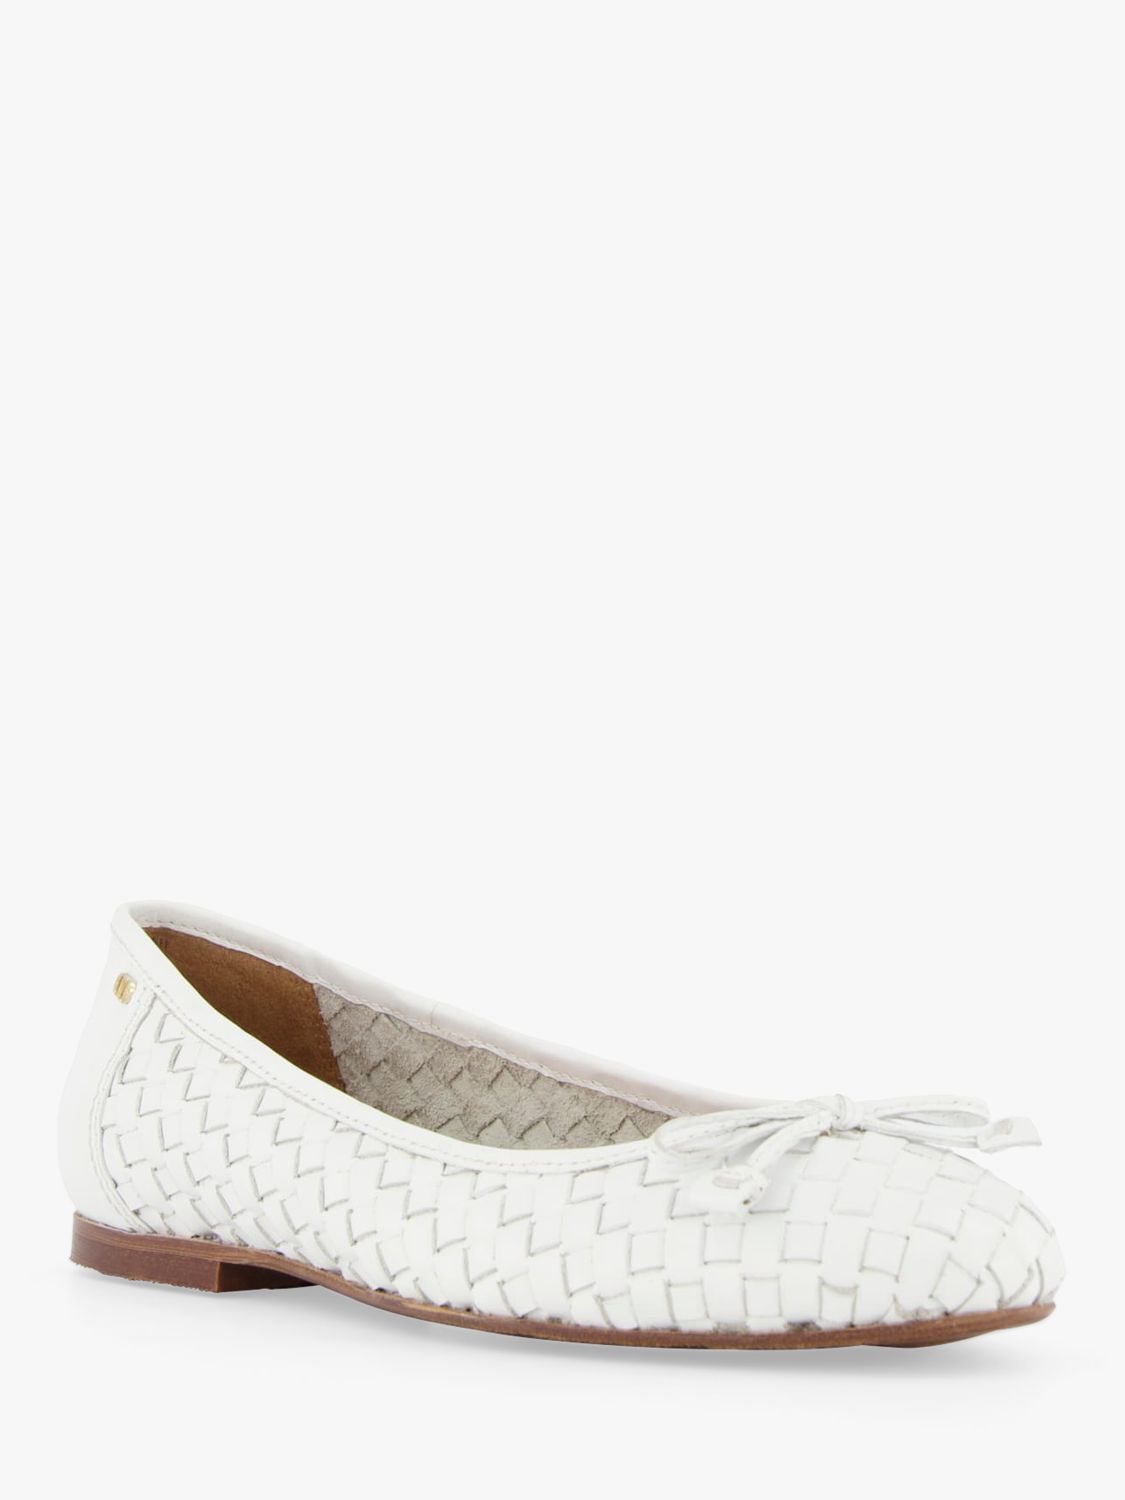 Dune Hartleys Woven Leather Ballet Pumps, White at John Lewis & Partners